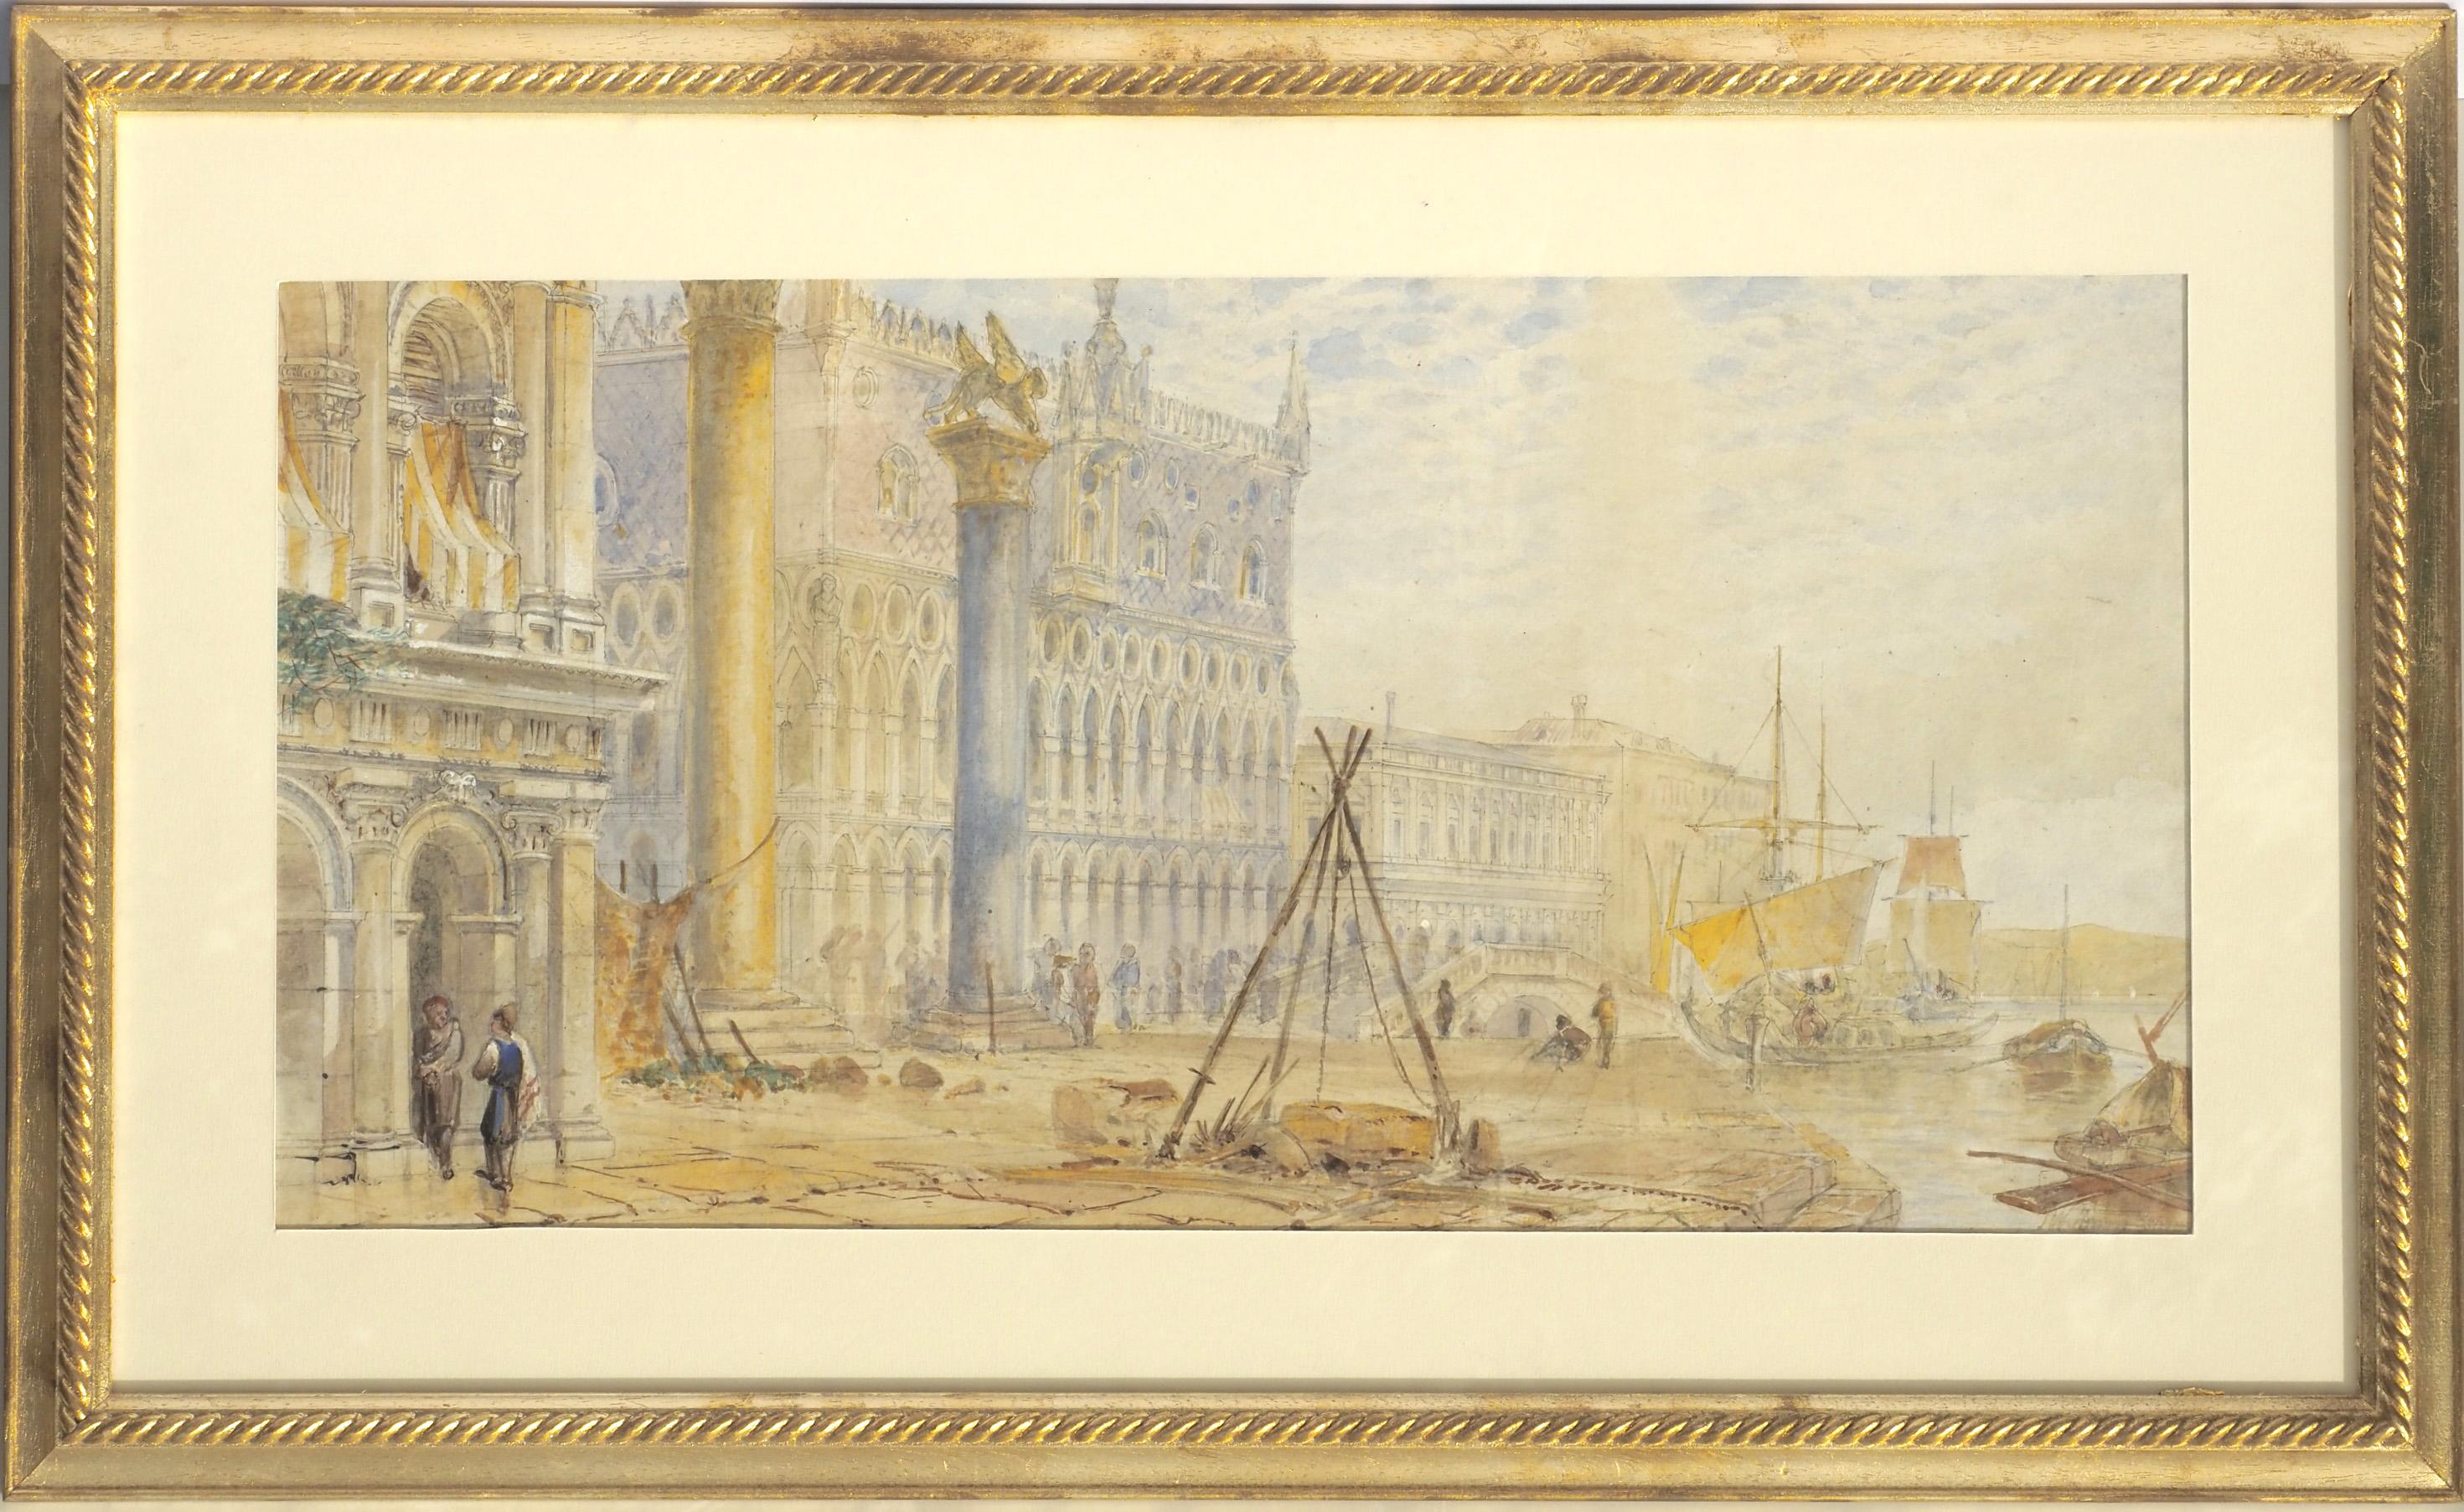 Aquarelle view of Venice by late-XIX-century artist
The aquarelle created by an artist of the late XIX century depicts the view of Saint Mark square in Venice. 
The overall condition is excellent.
Signature and date are located at the bottom margin